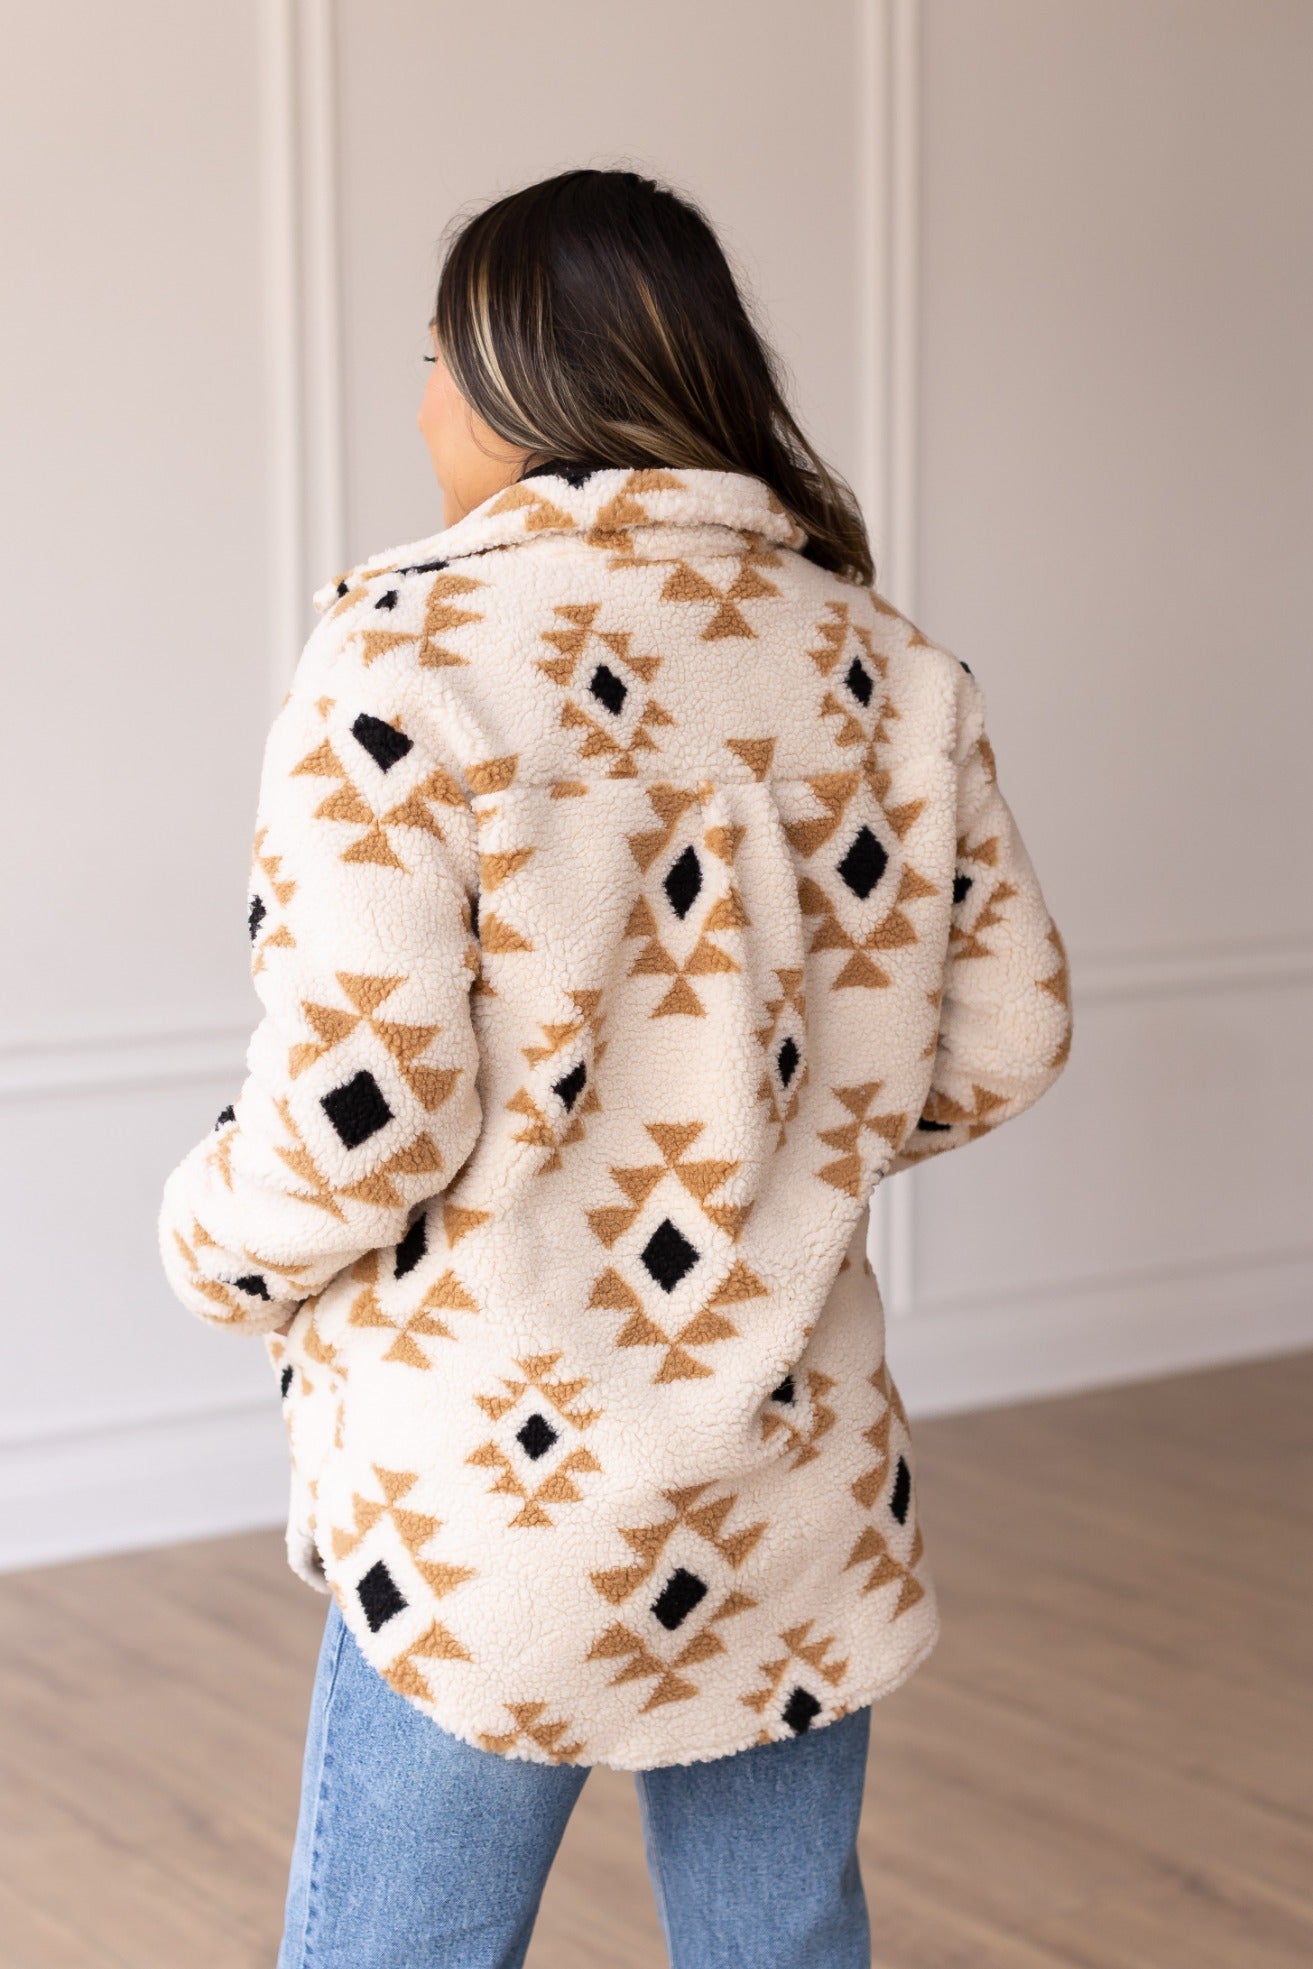 She Could Be The One Brown Aztec Pattern Button Down Sherpa